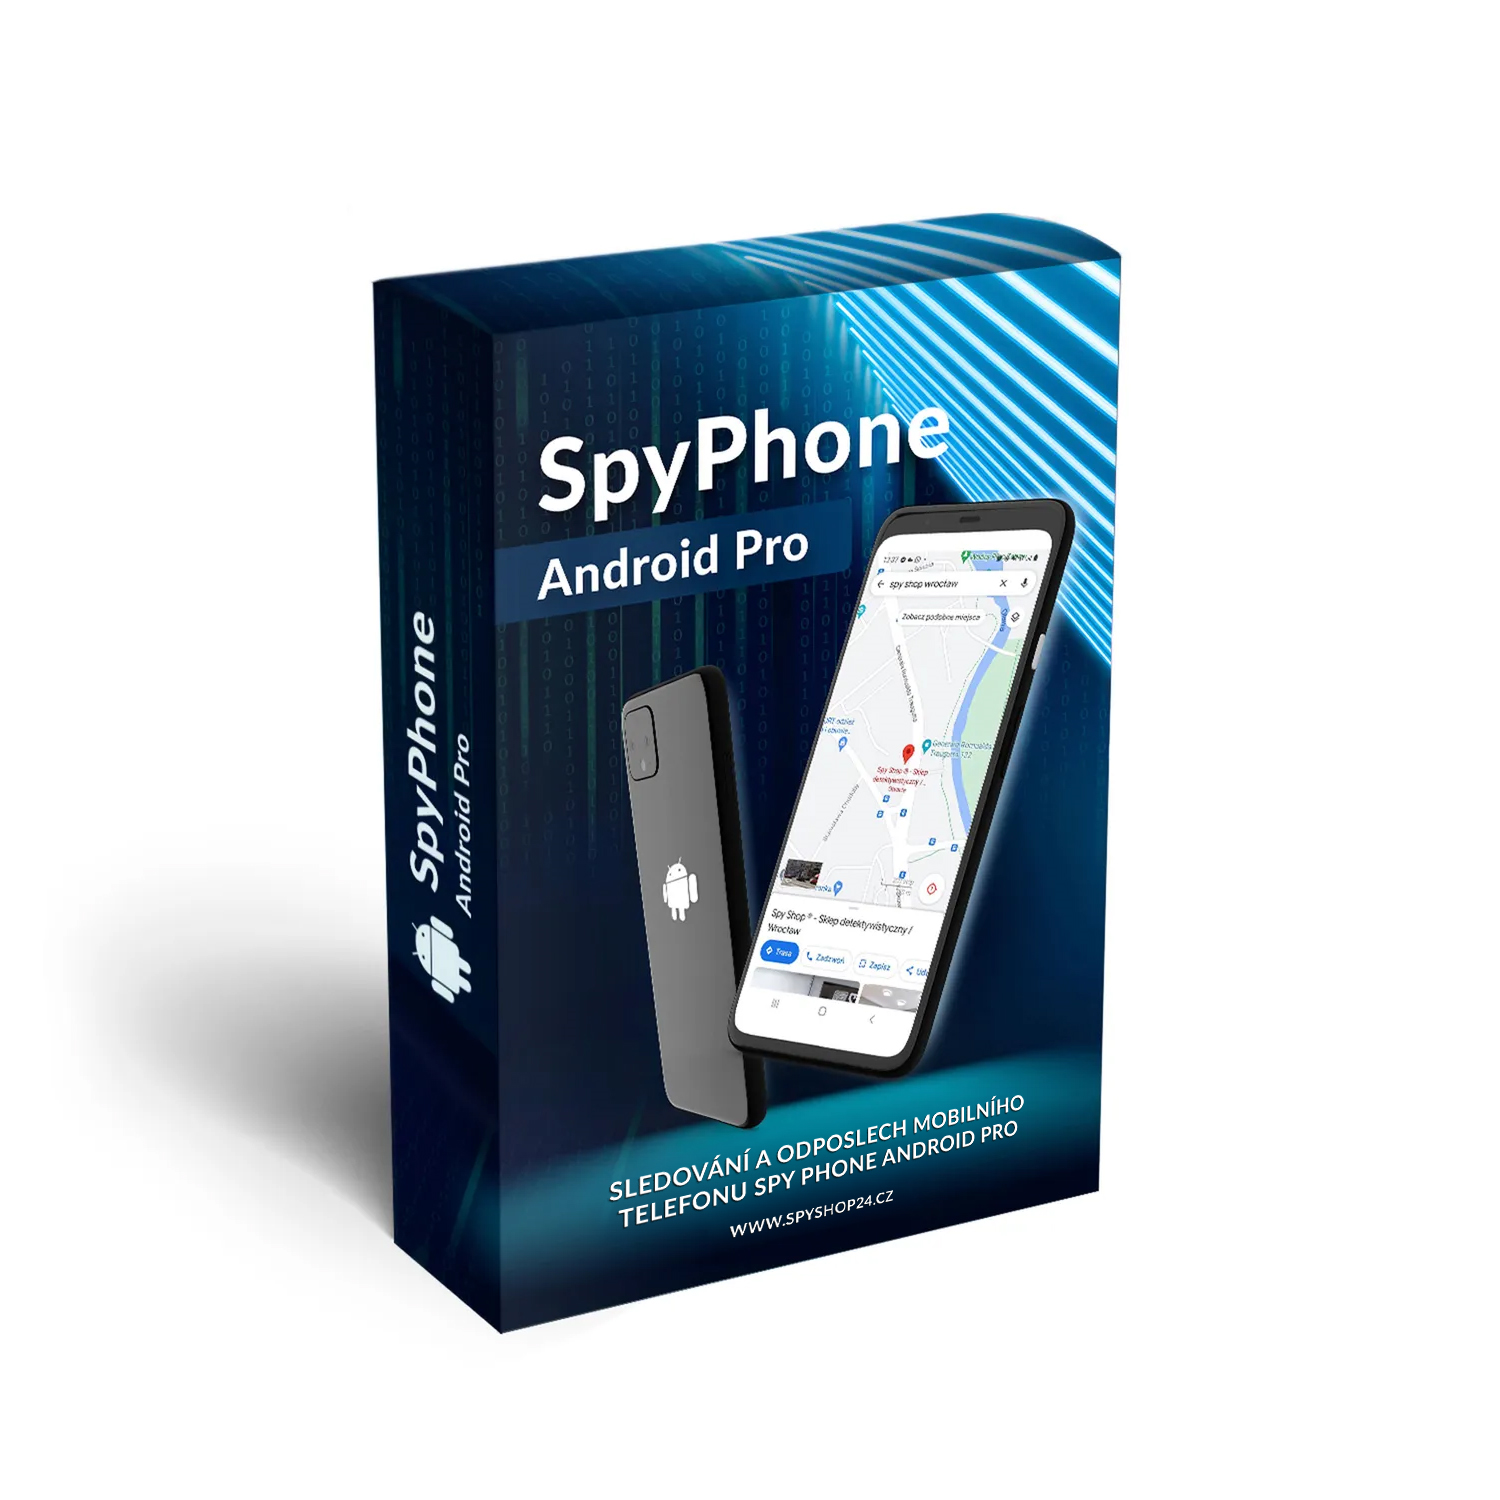 SpyPhone Android Pro